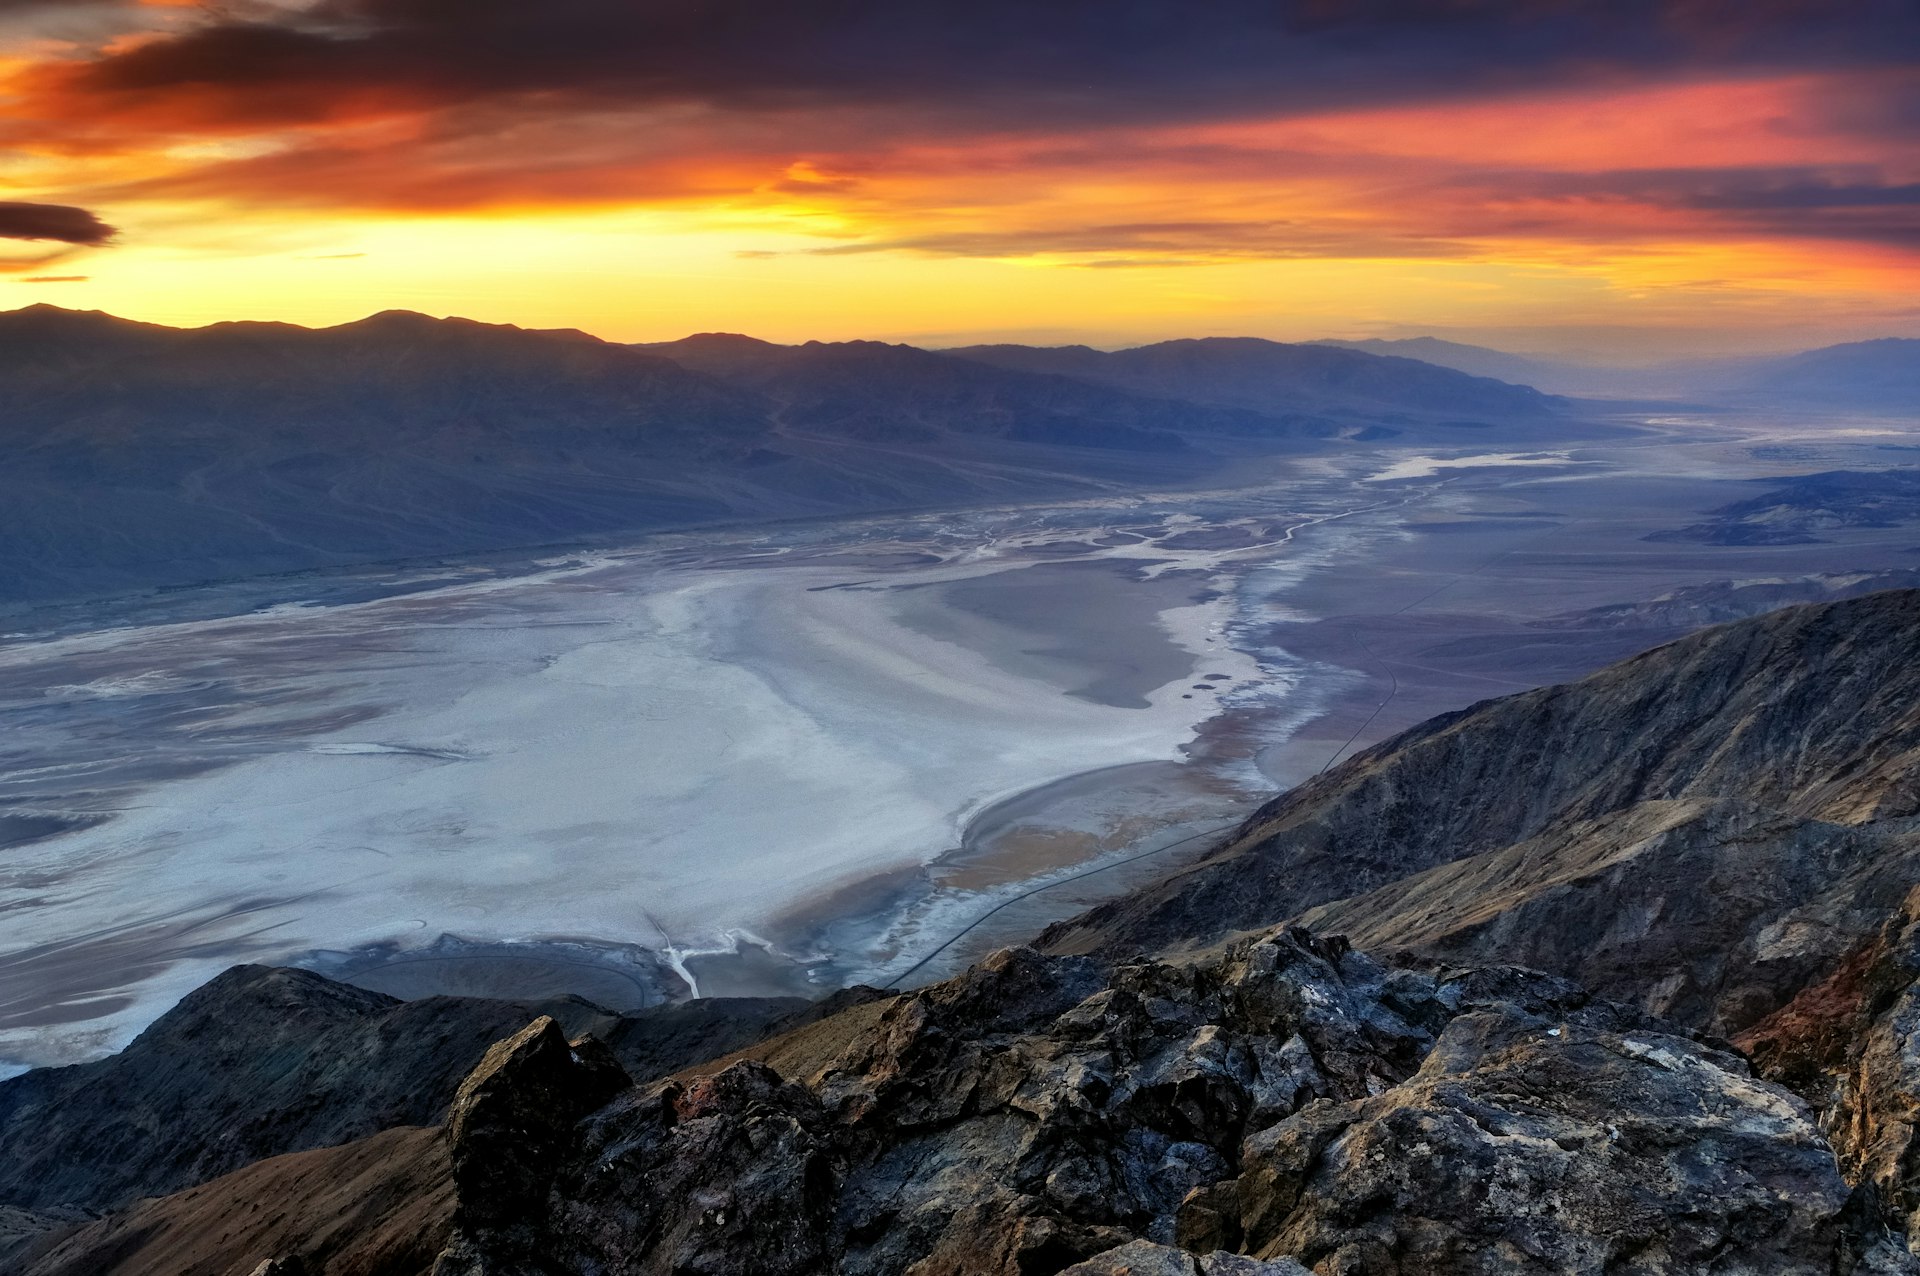 Sunset over Badwater Basin, Death Valley